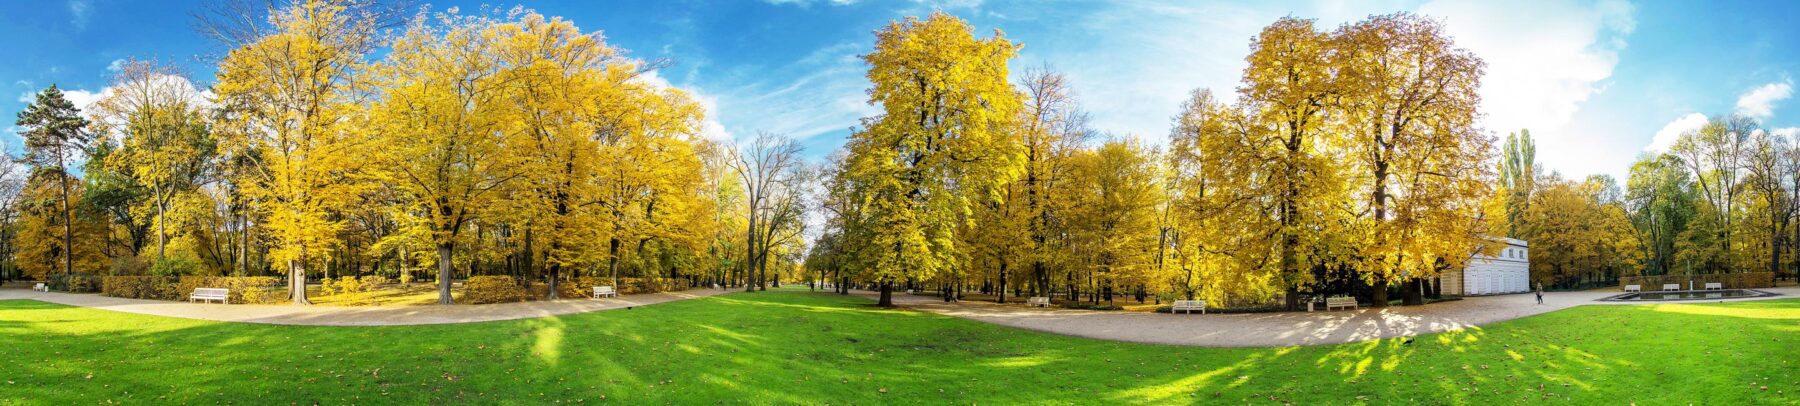 Green lawn with fertilizer and yellow trees